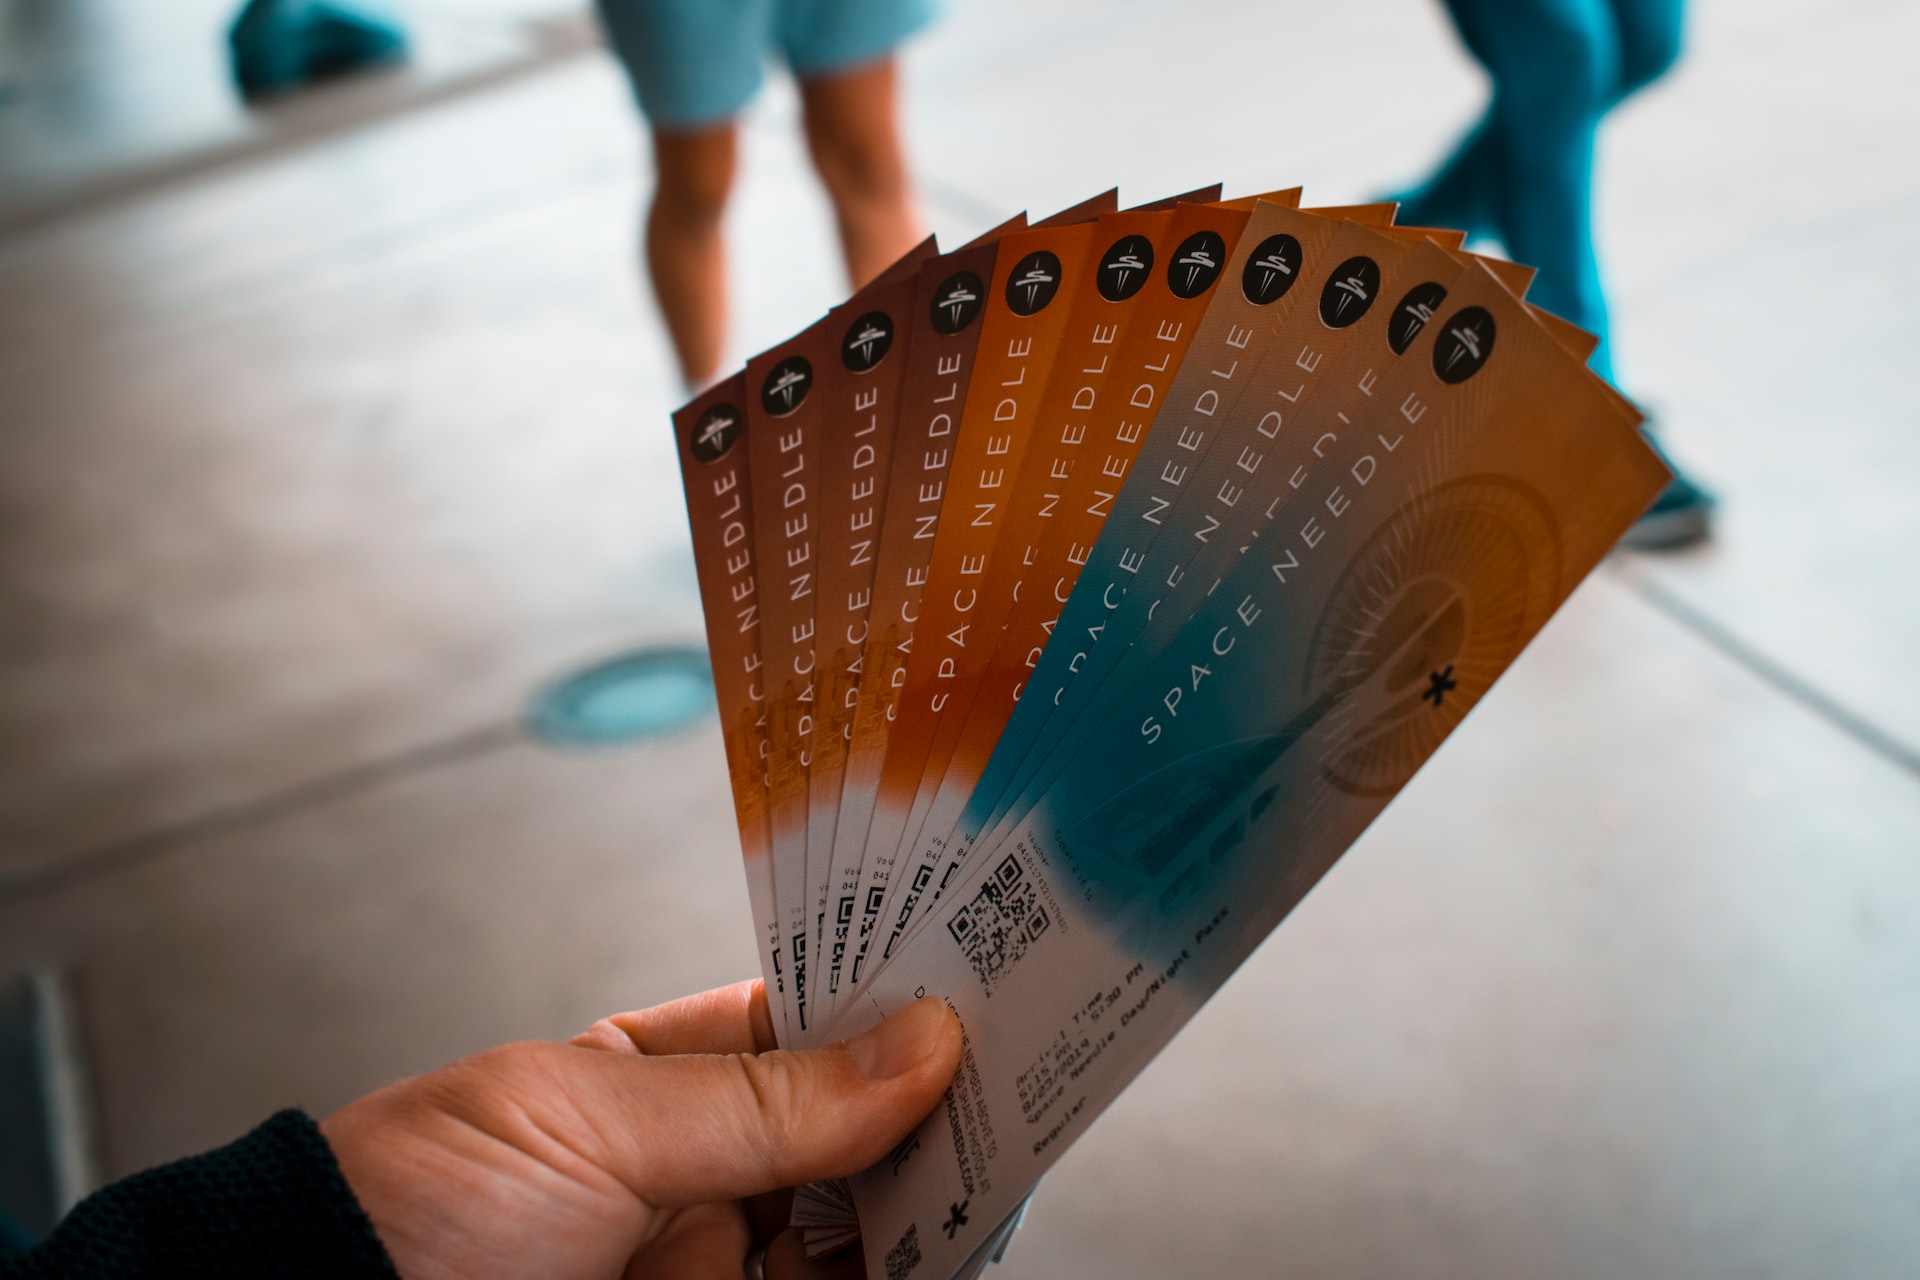 Person's hand holding a fan of multiple event tickets